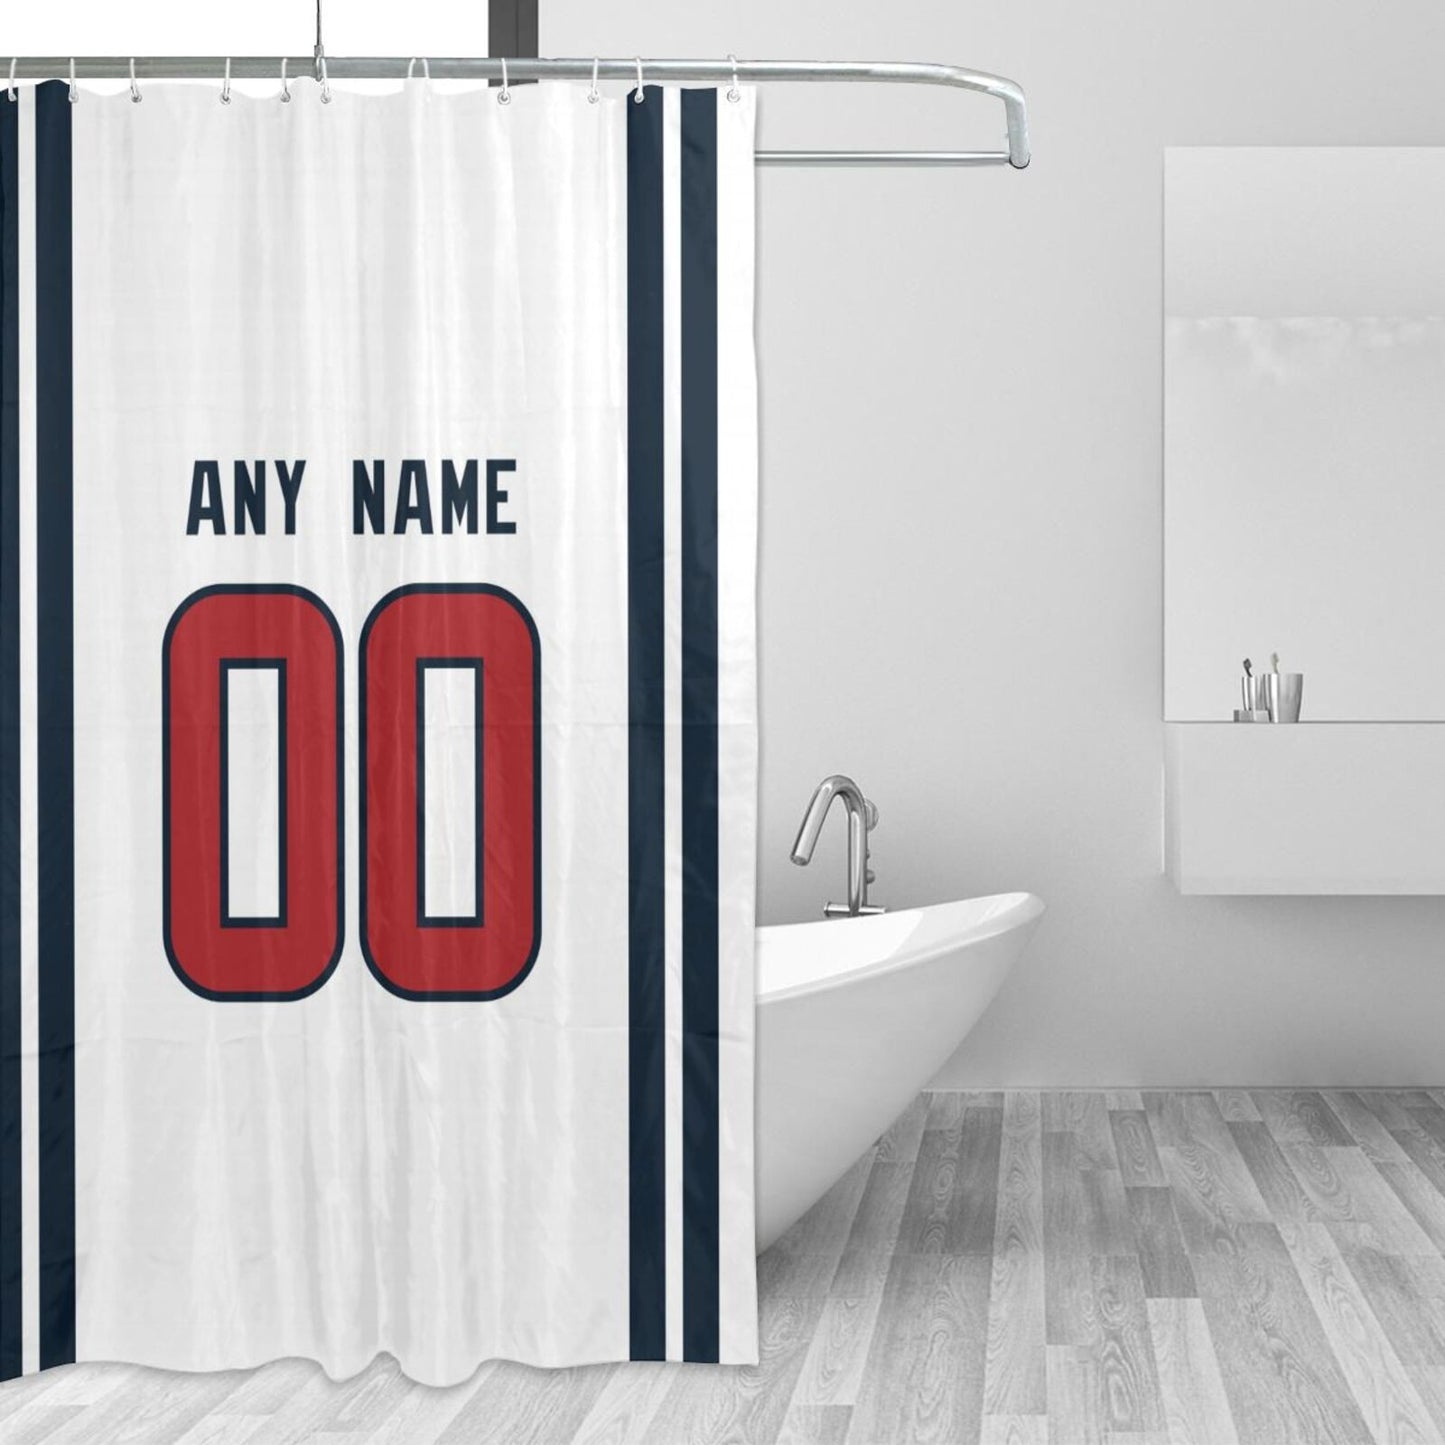 Custom Football Houston Texans style personalized shower curtain custom design name and number set of 12 shower curtain hooks Rings